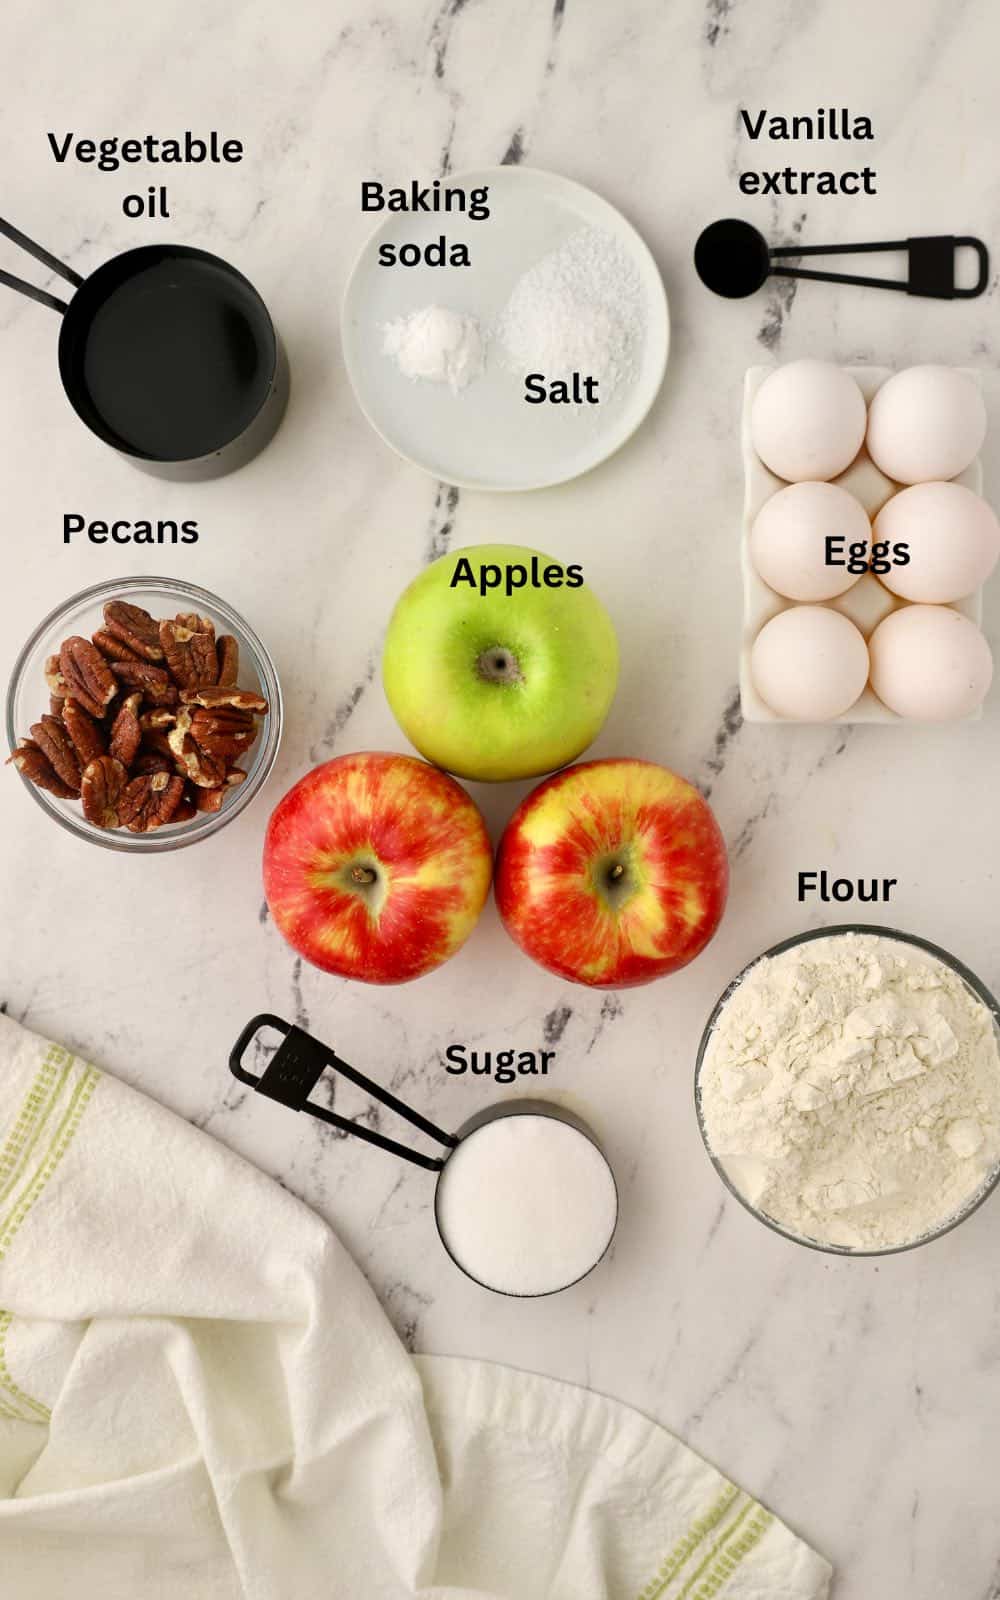 Ingredients for an apple cake including apples, pecans, and flour. 